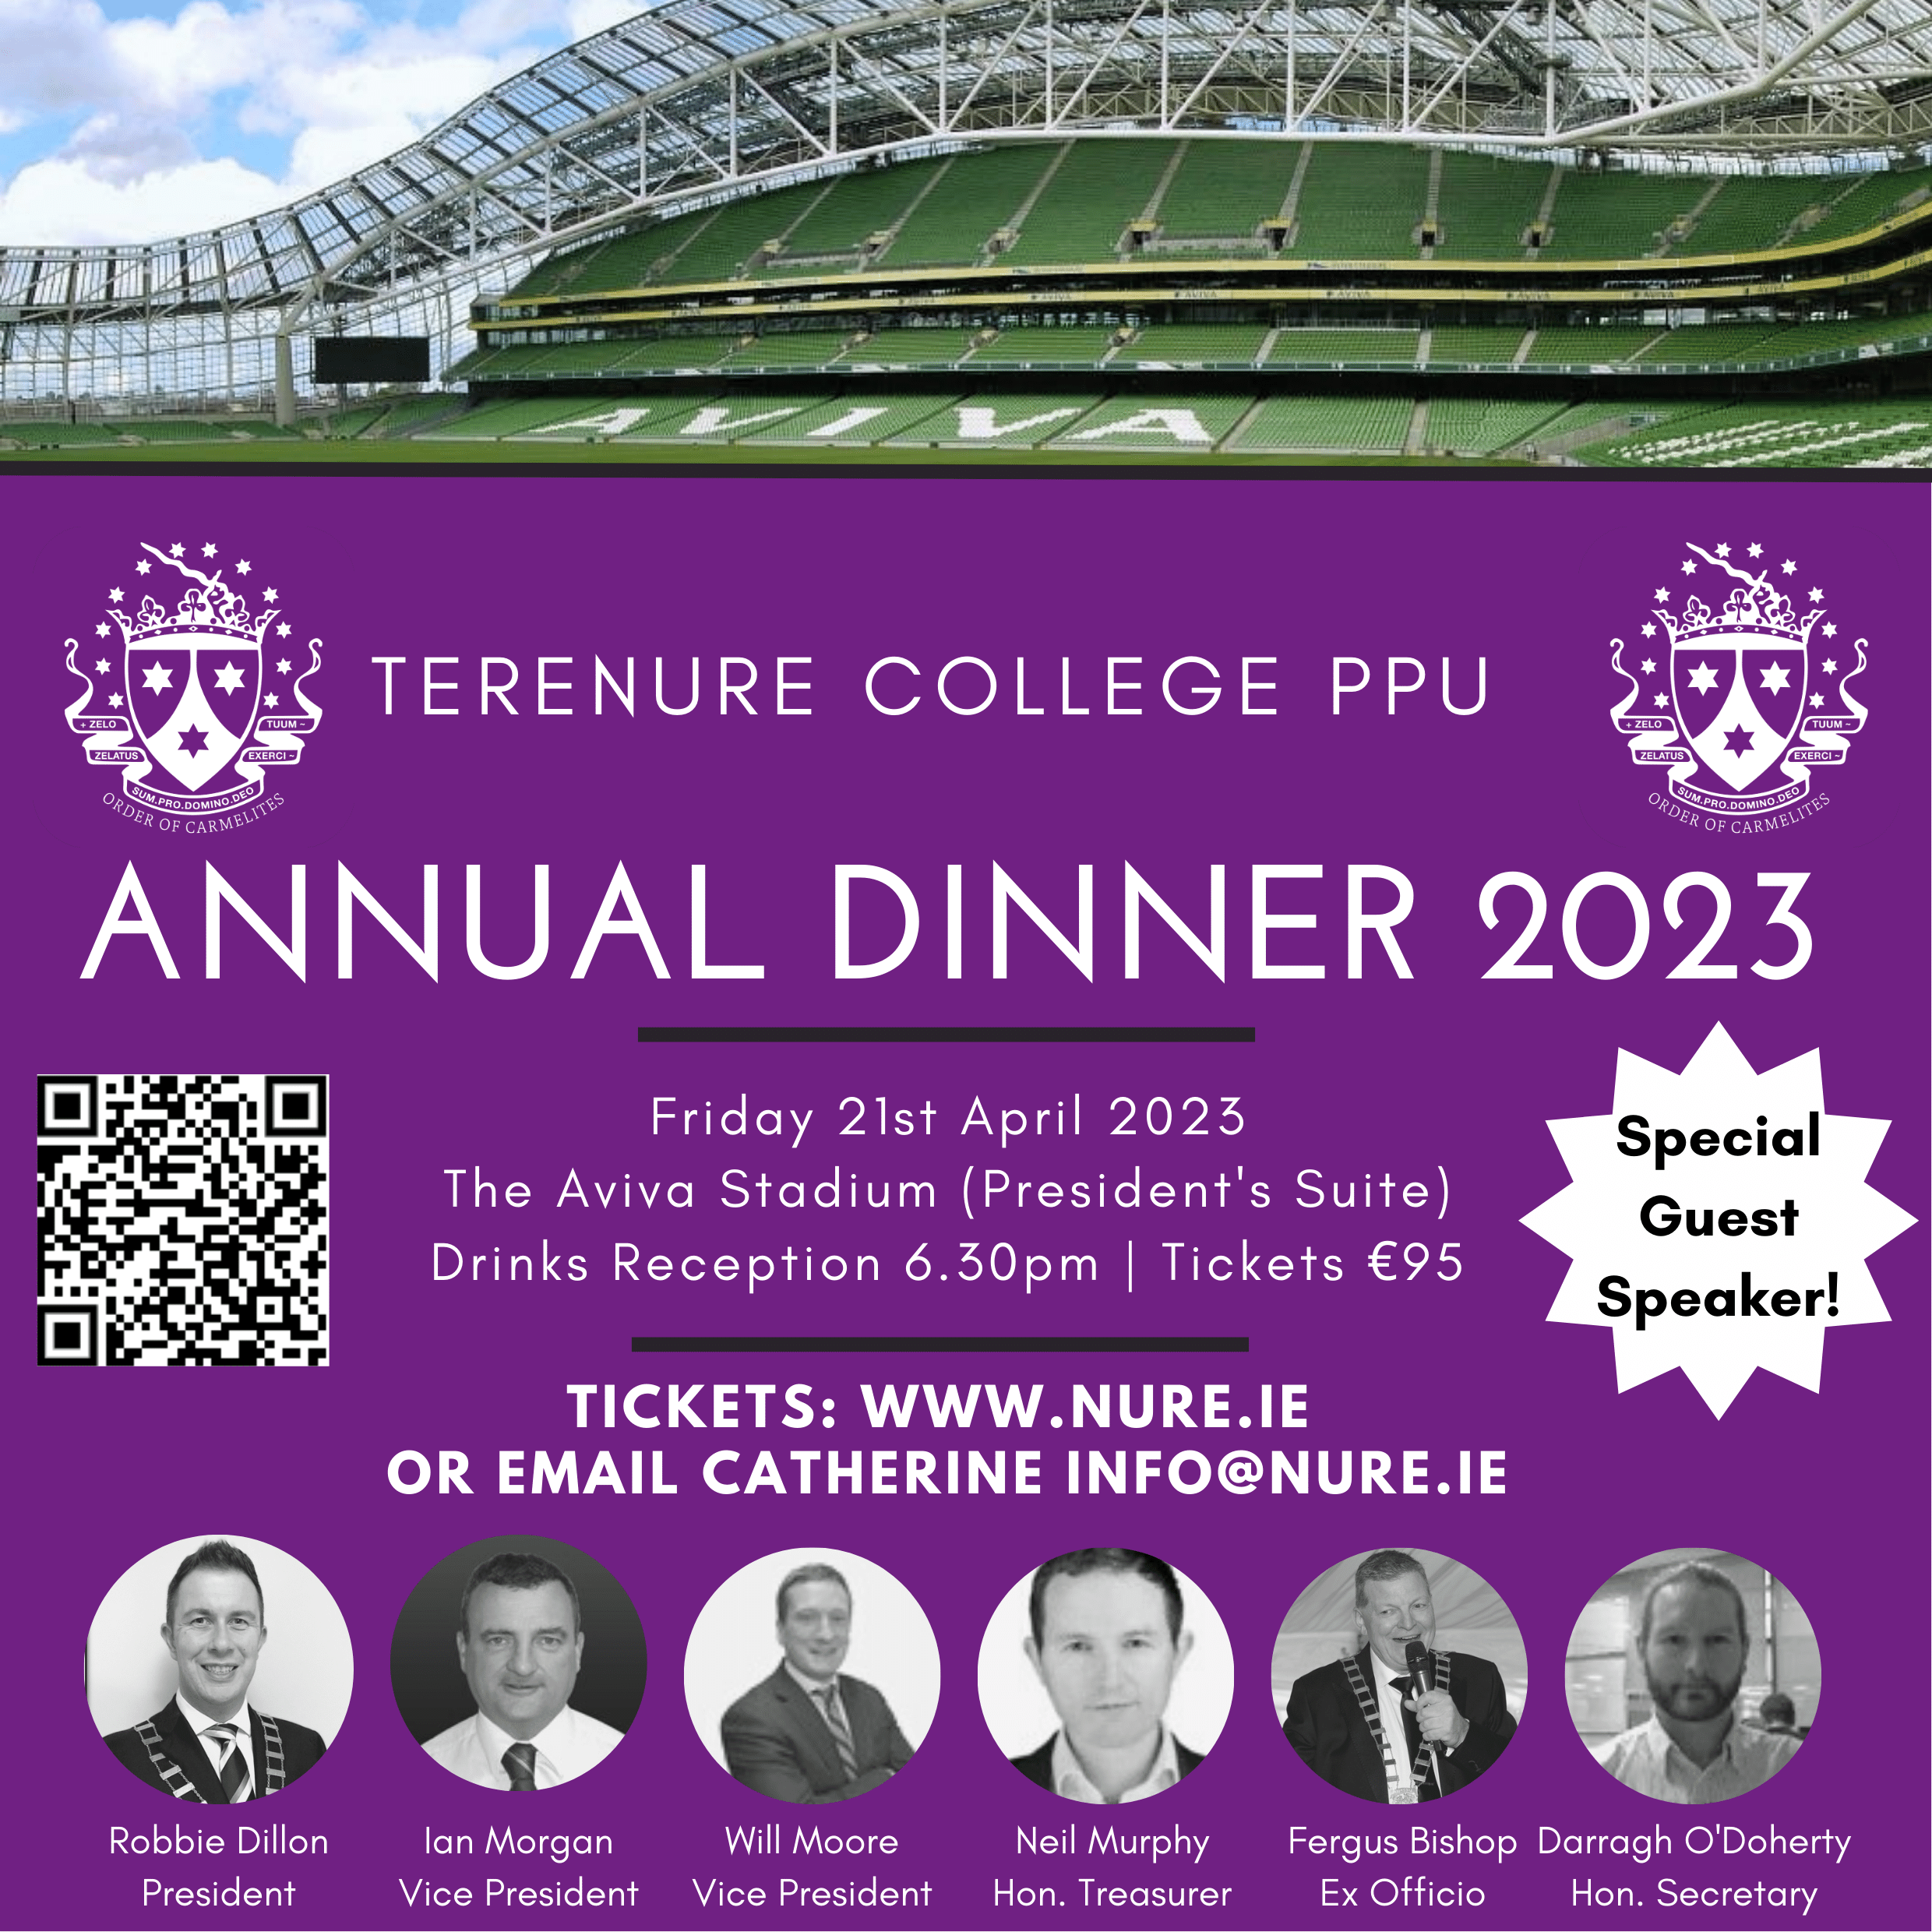 The PPU Annual Dinner Took Place on Friday 21st of April 2023 in the Aviva Stadium